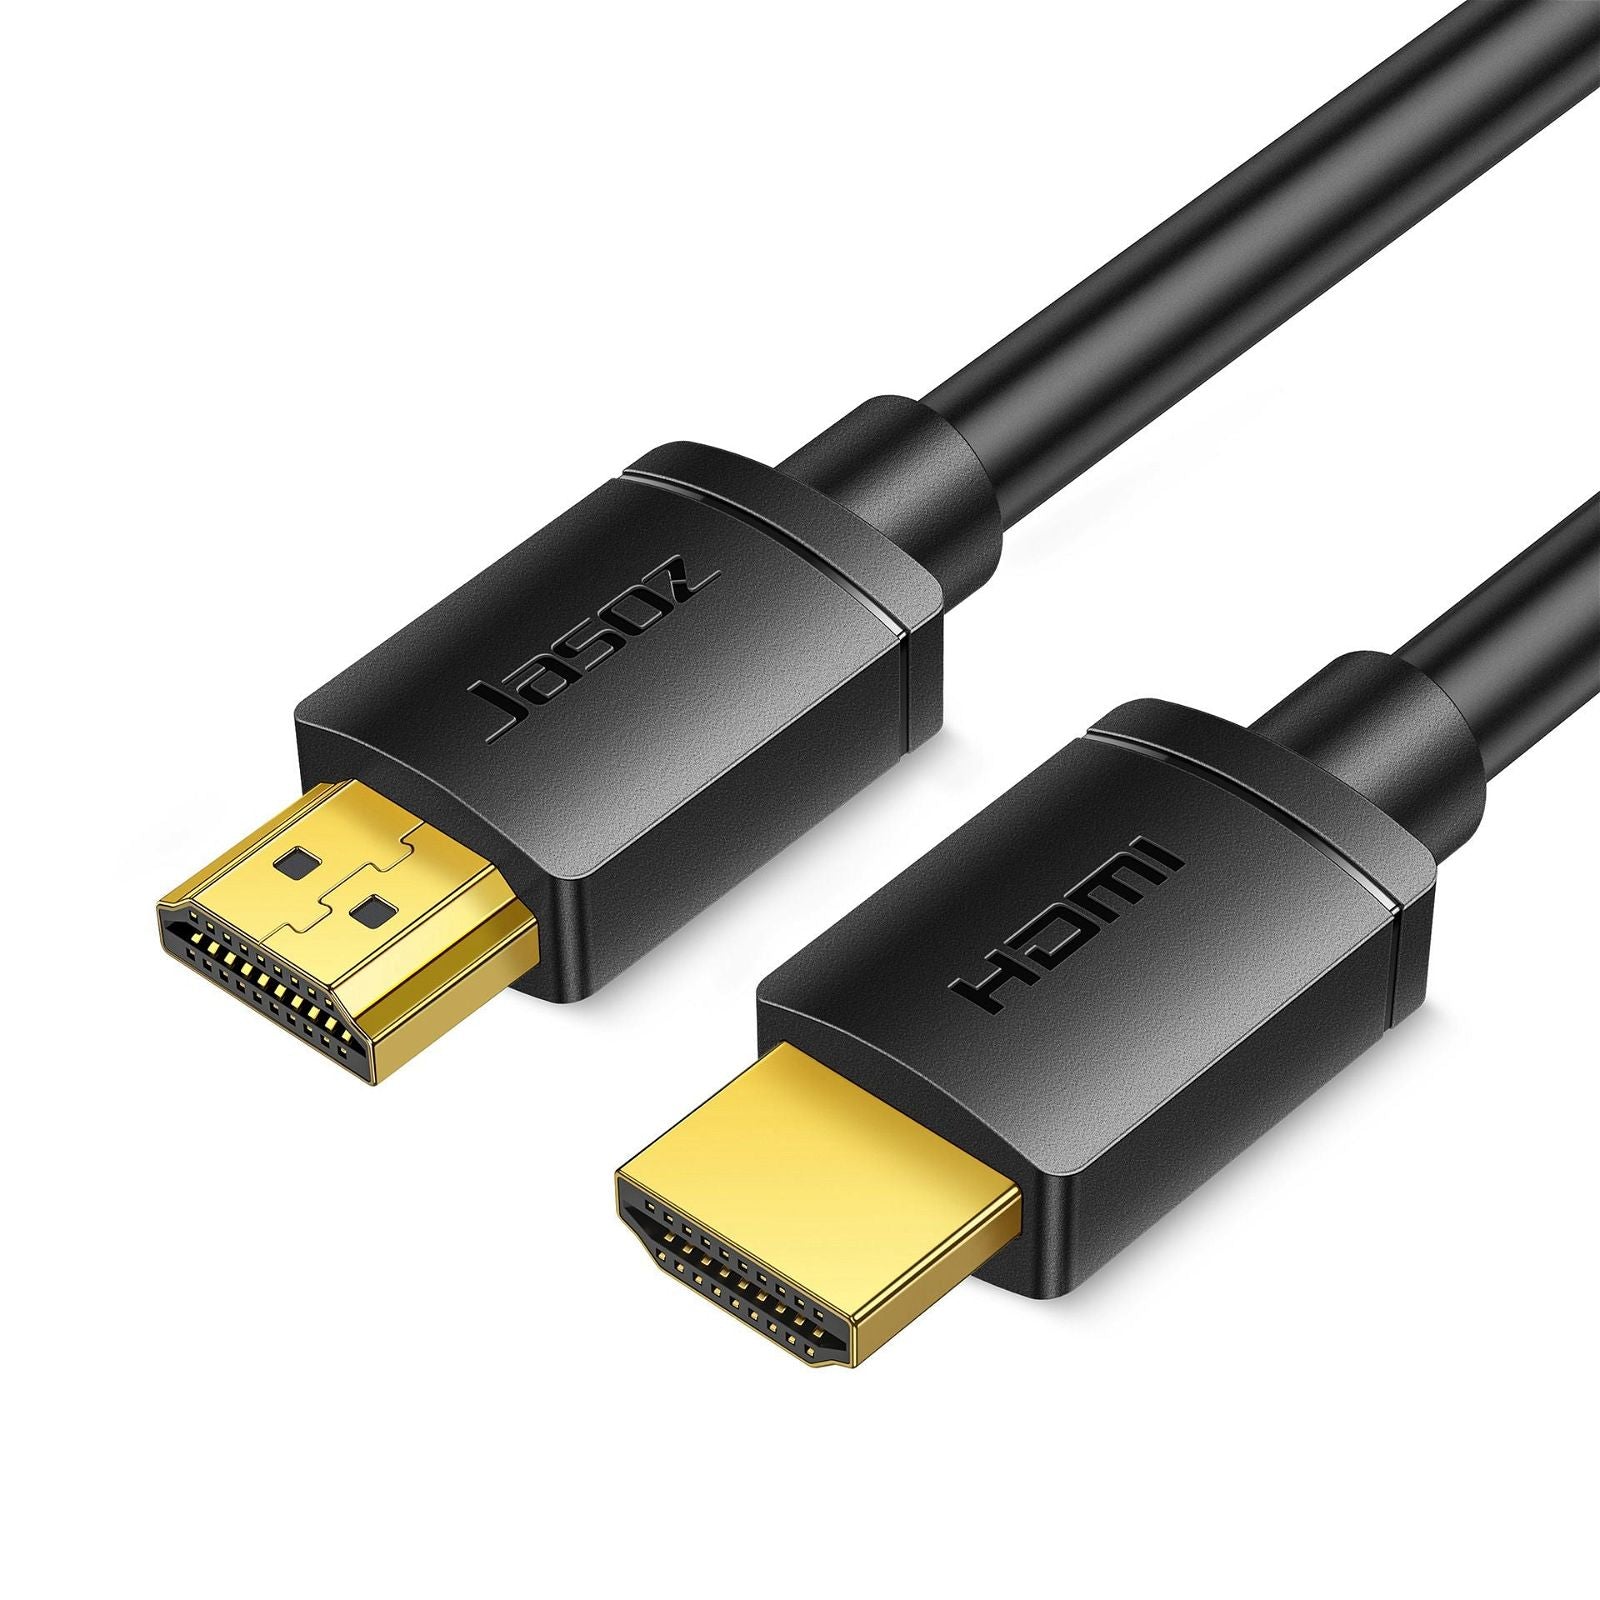 0.5m High Definition HDMI 2.0 Adapter Cable 4K / 60Hz Cord for Xiaomi Huawei TV Box - UNIQKART